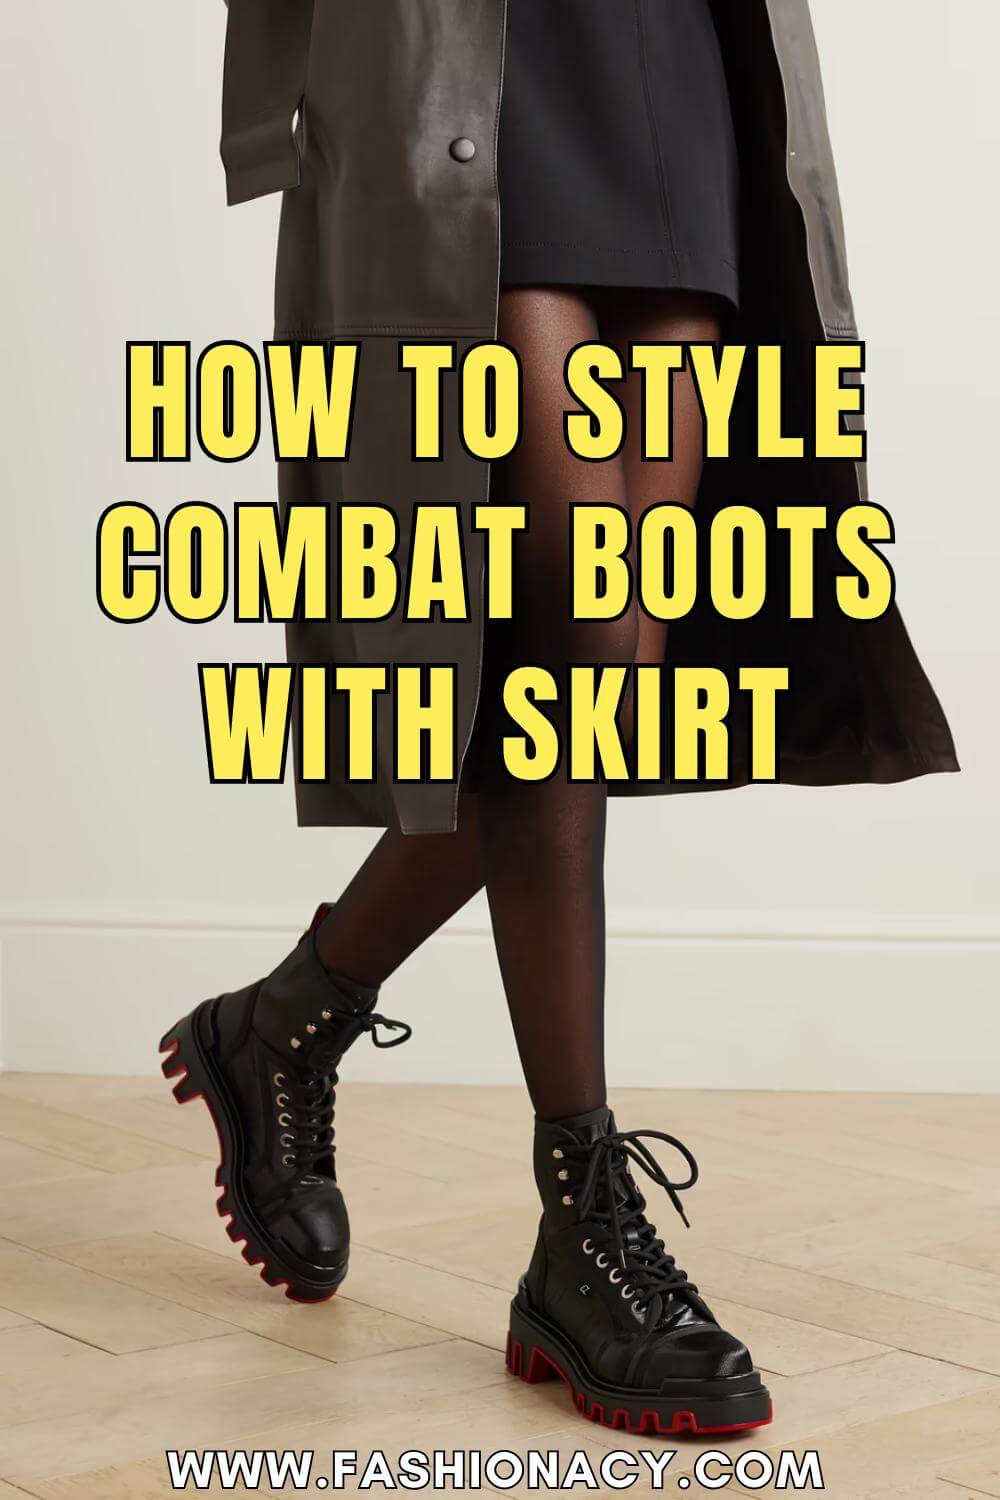 How to Style Combat Boots